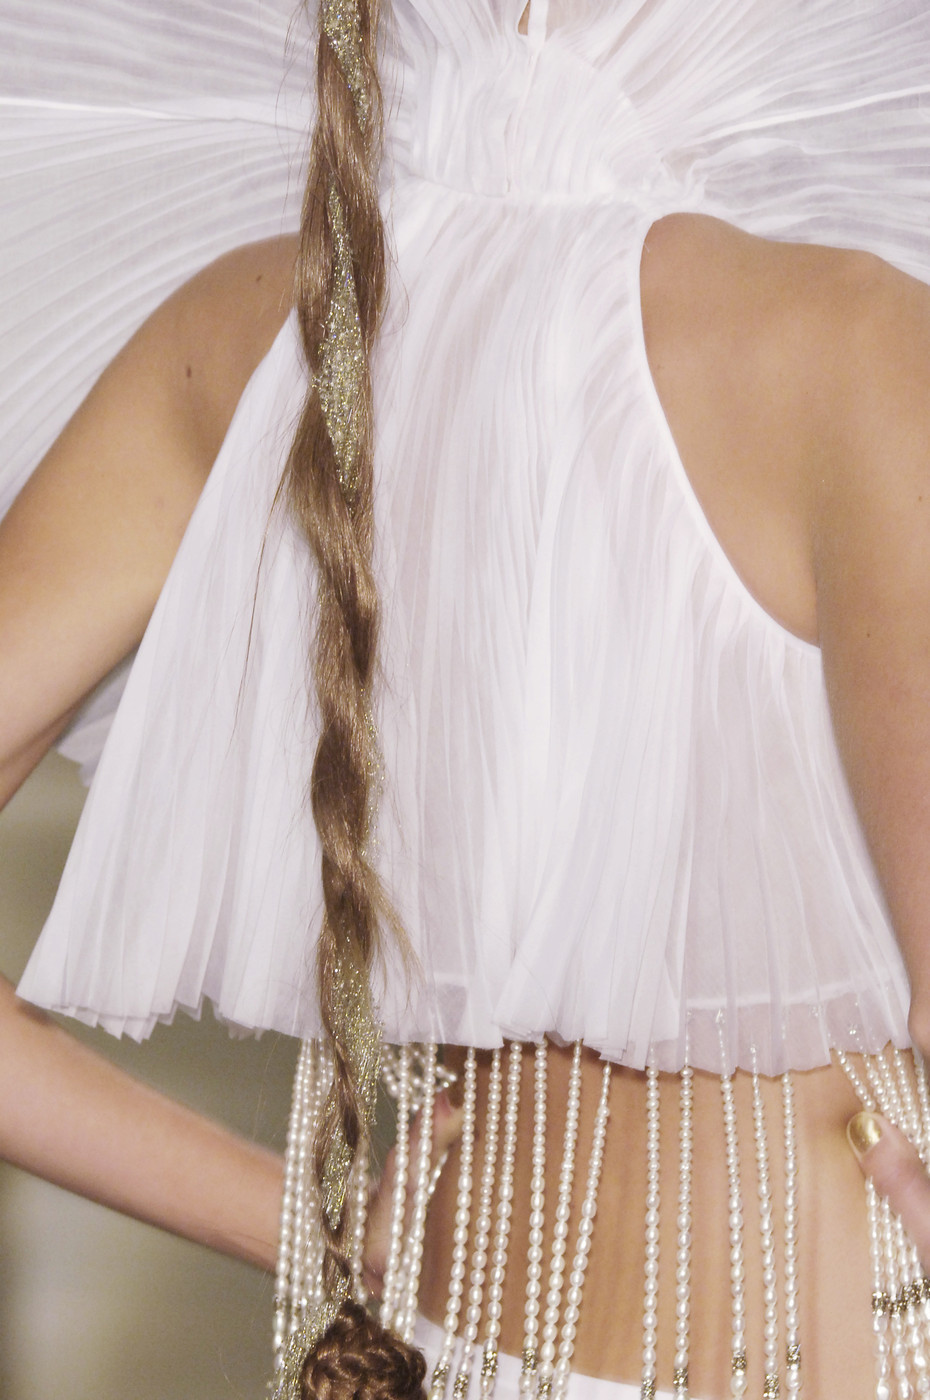 nature-and-culture: highqualityfashion:  Jean Paul Gaultier SS 06  Jean-Paul Gaultier